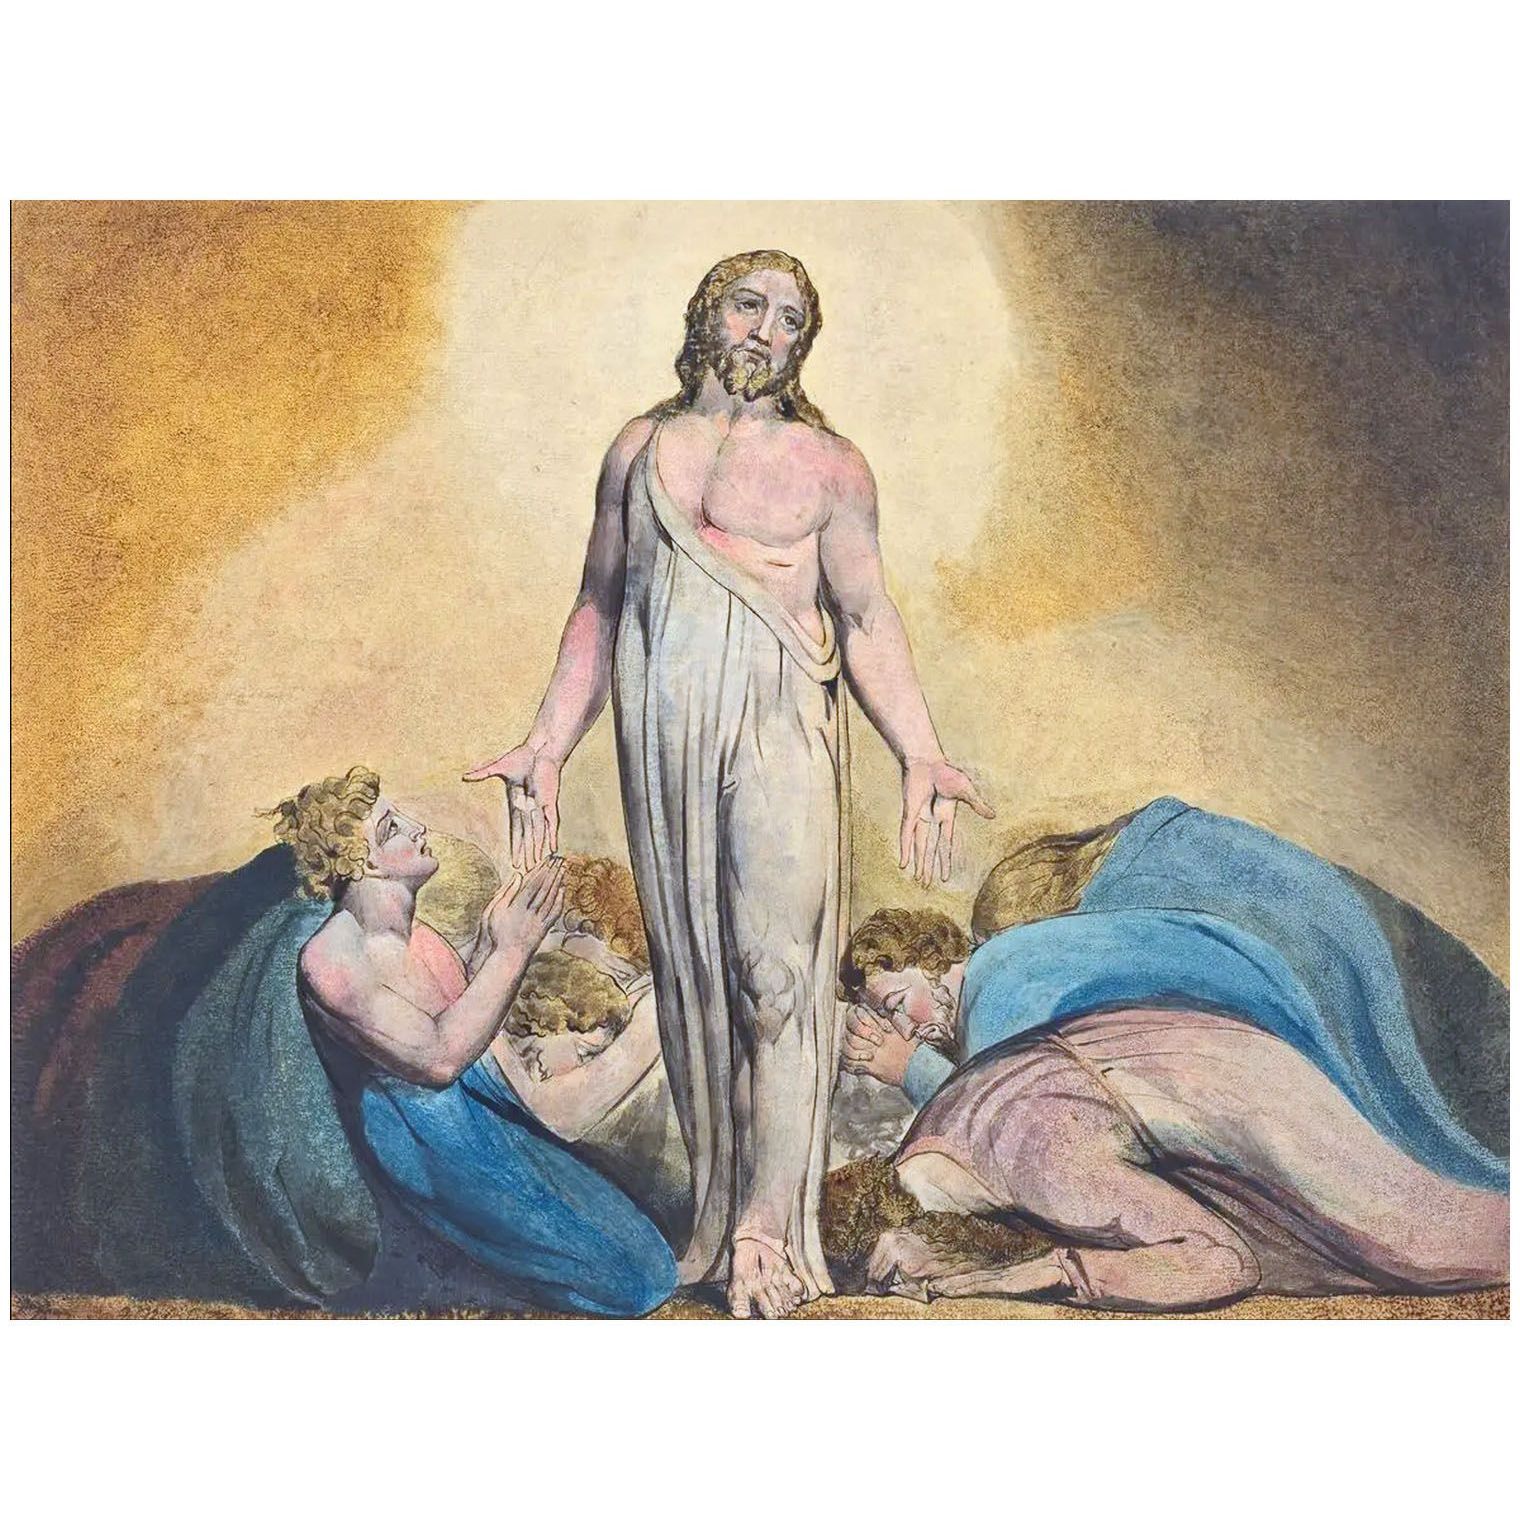 William Blake. The Appearance of Christ. 1795. National Gallery Washington